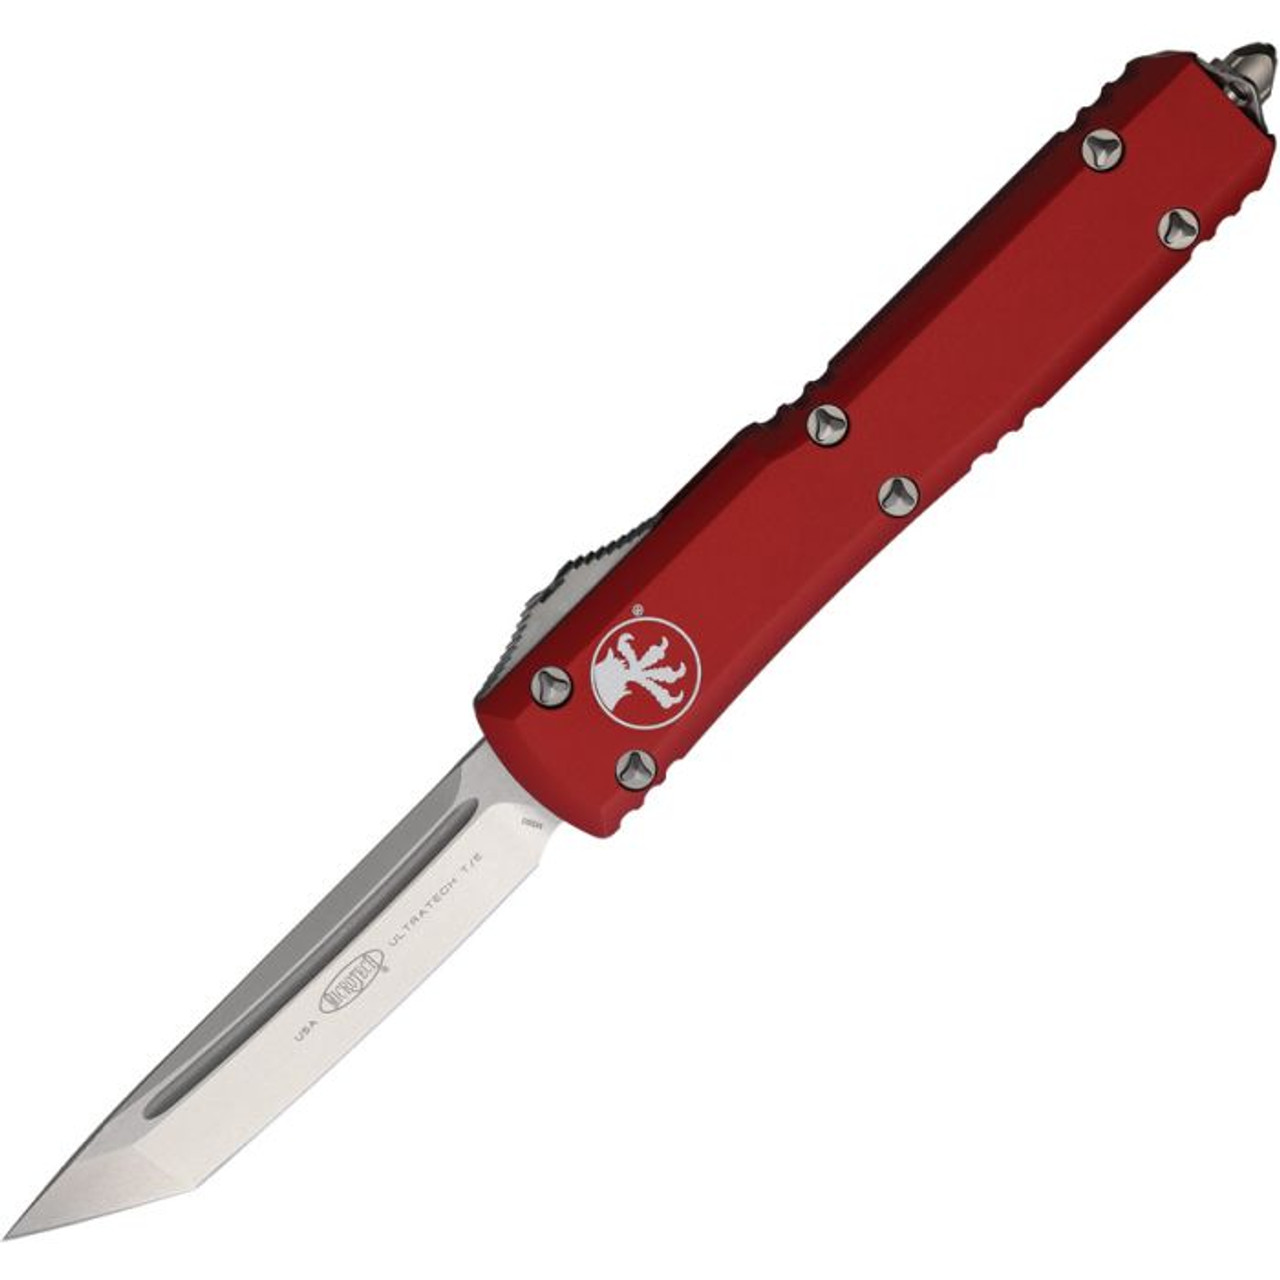 Microtech Ultratech T/E OTF (MCT12310RD) 5" Bohler M390 Stonewashed Tanto Plain Blade, Red Aluminum Handle with Glass Breaker